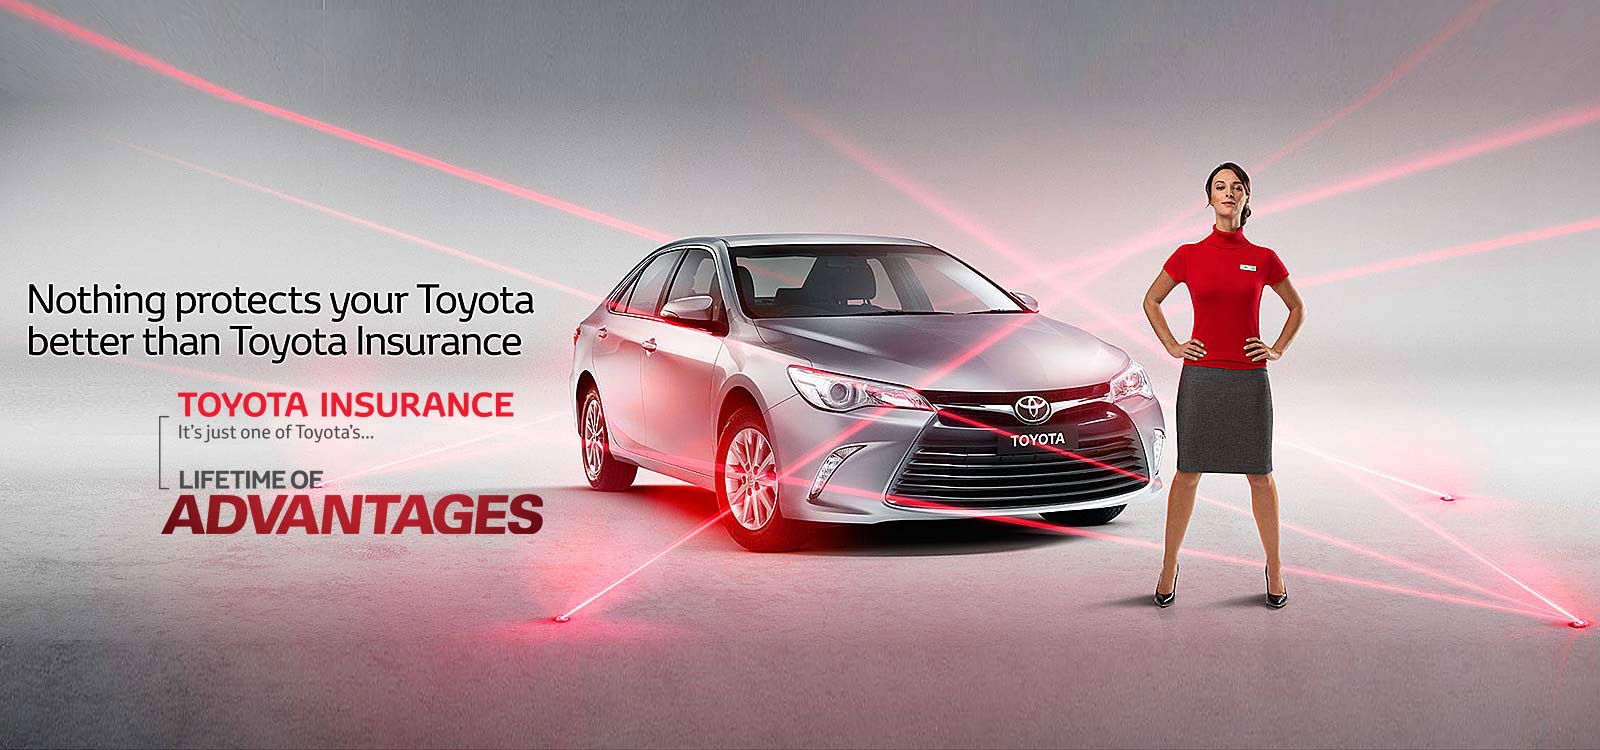 Toyota Advantages Of The Cars